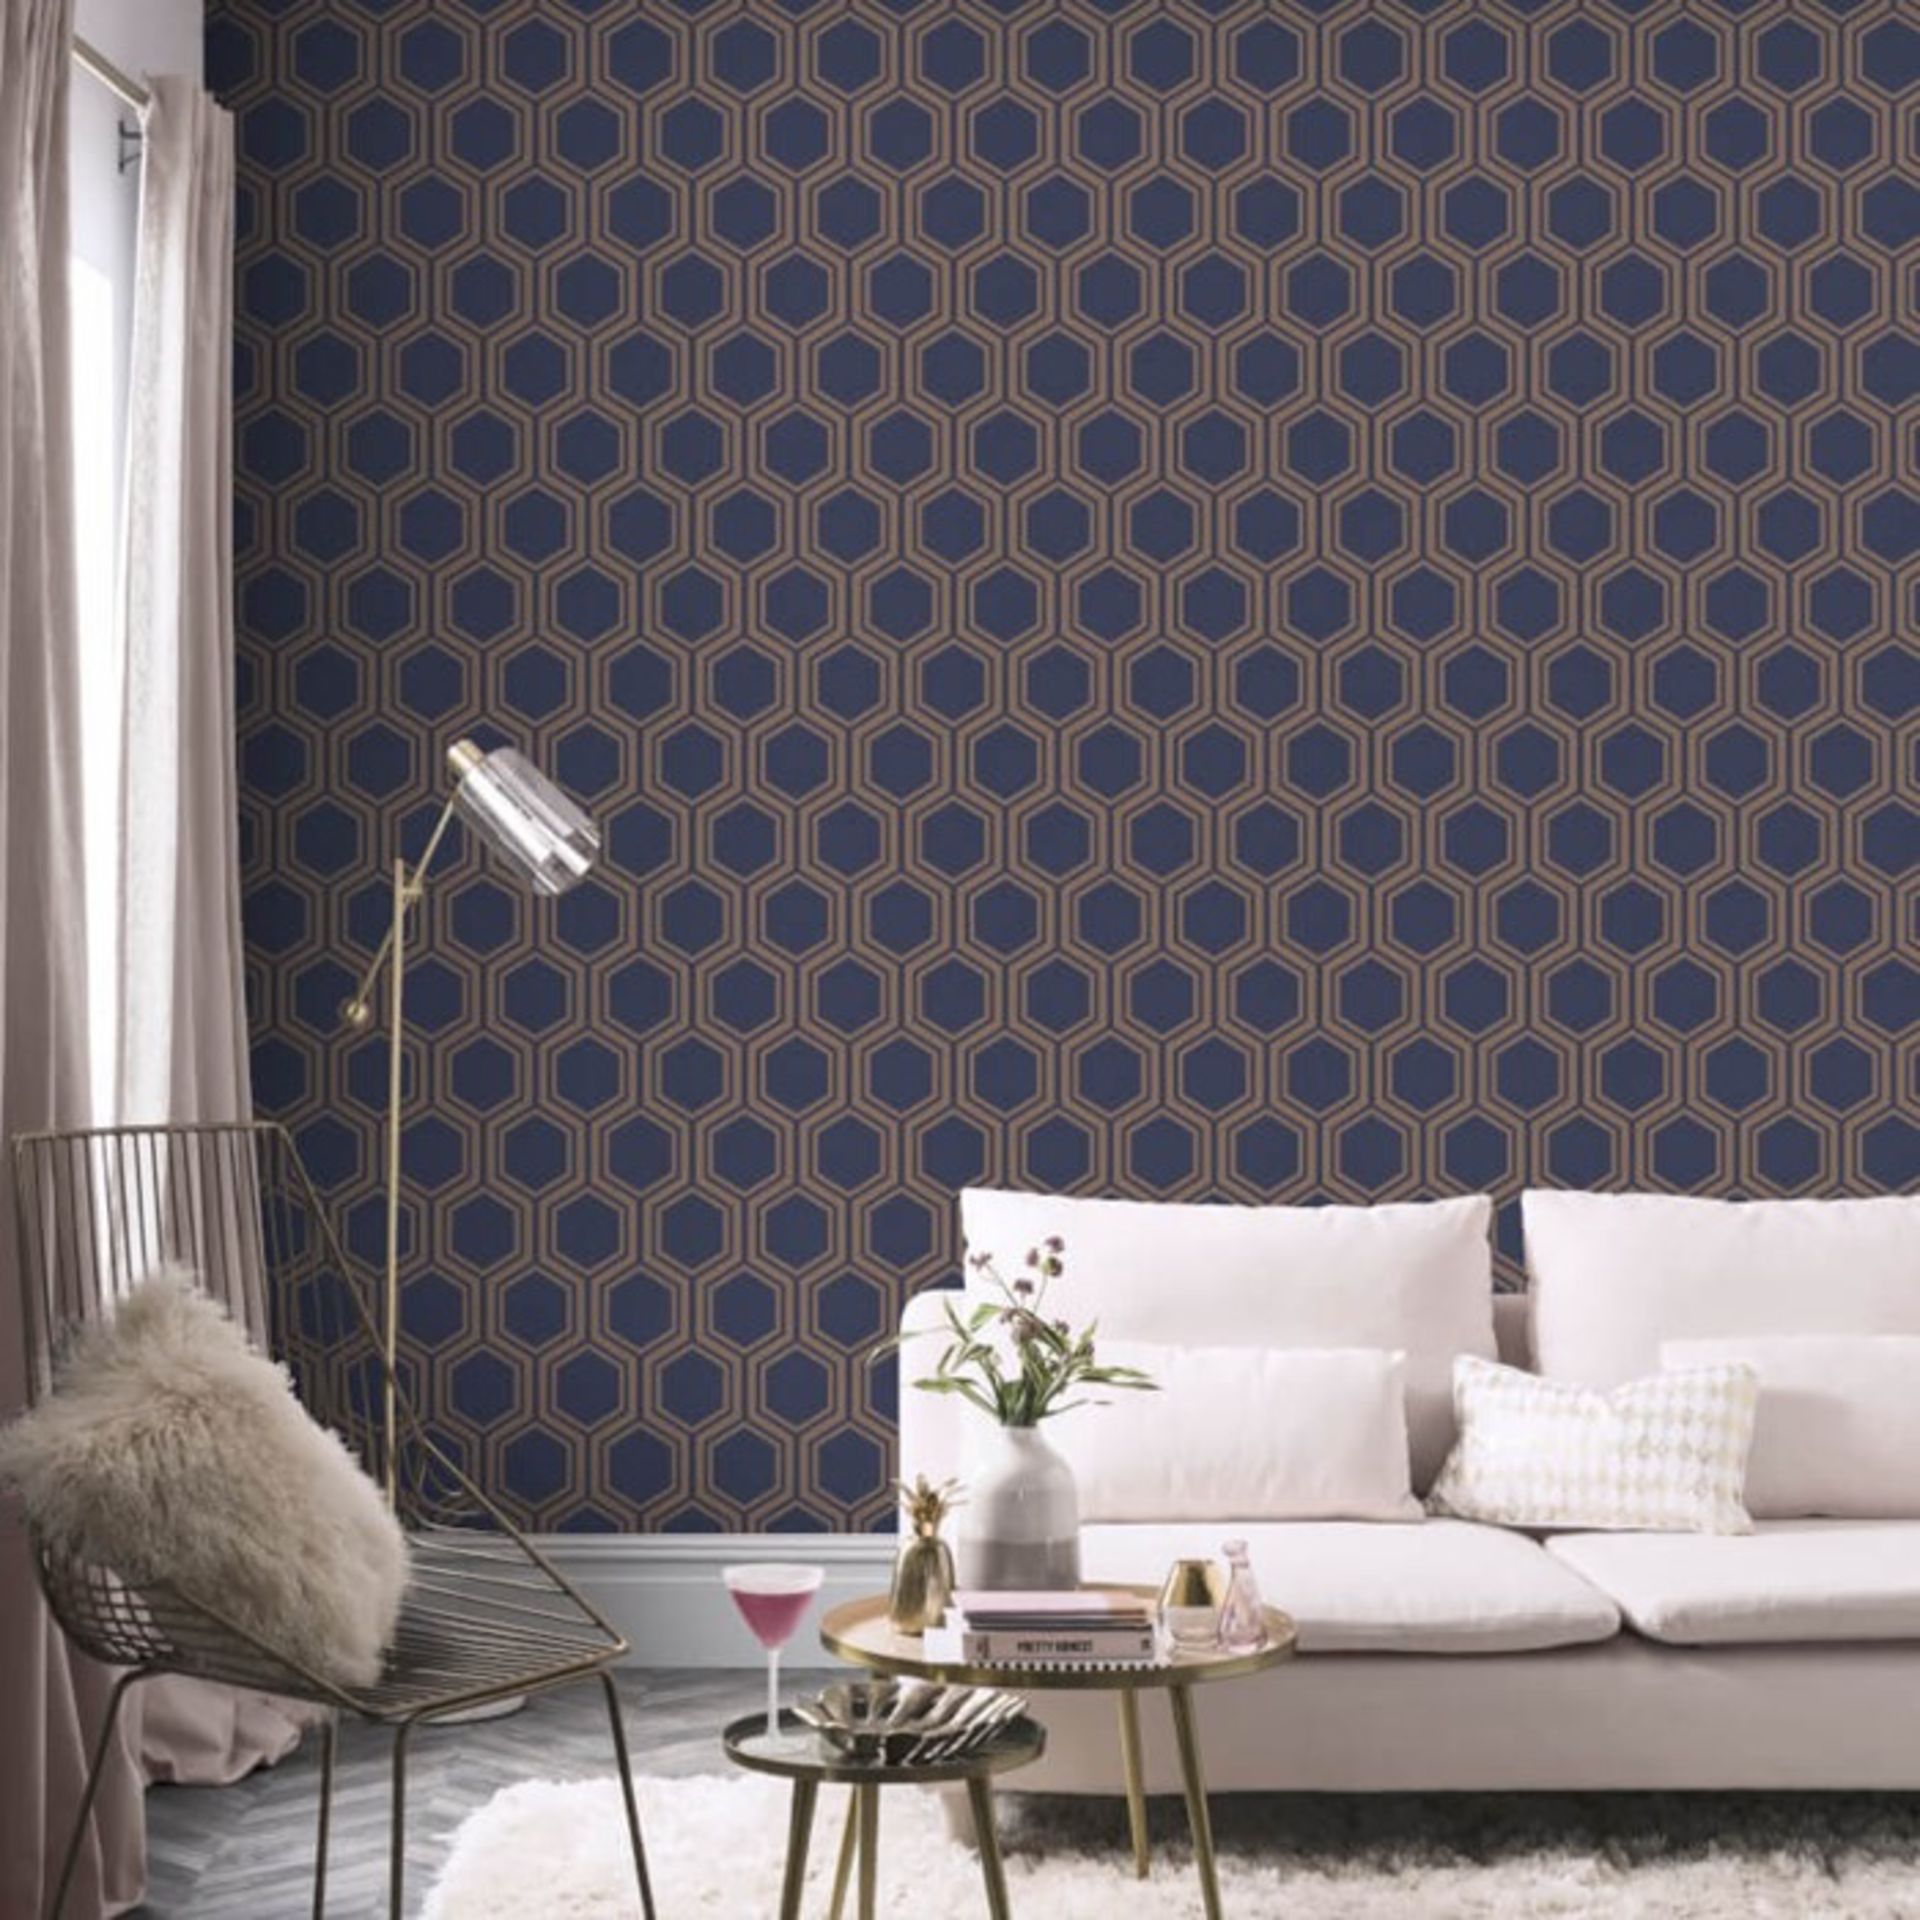 1 LOT TO CONTAIN 4 AS NEW ROLLS OF ARTHOUSE LUXE HEXAGON NAVY AND GOLD WALLPAPER - 906604 / RRP £